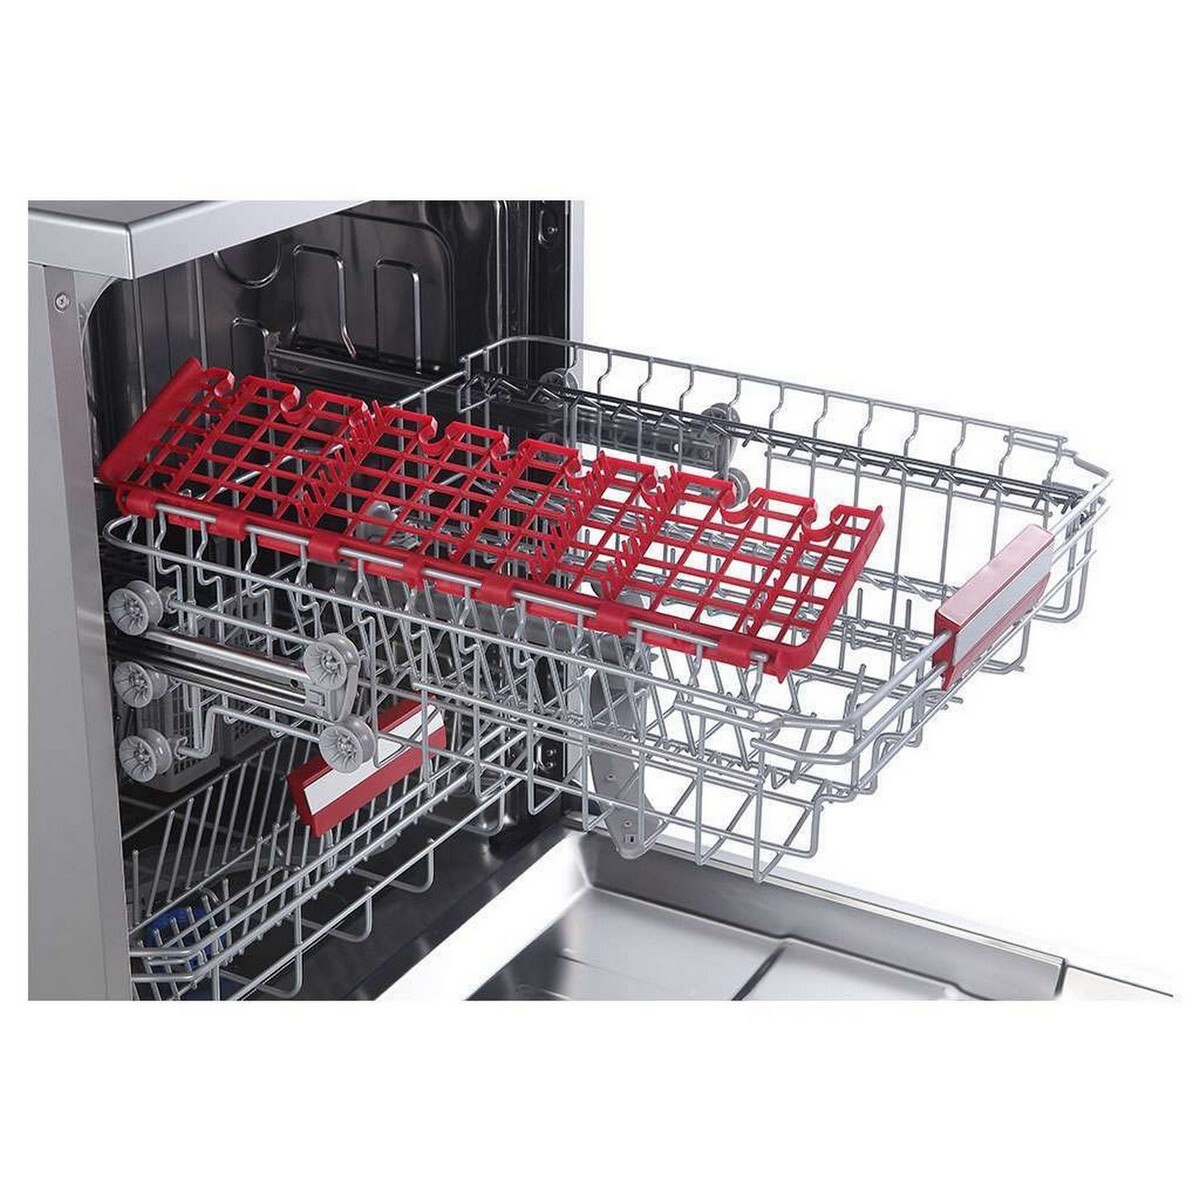 Toshiba 14 Place Settings Dish Washer DW-14F1IN(S)